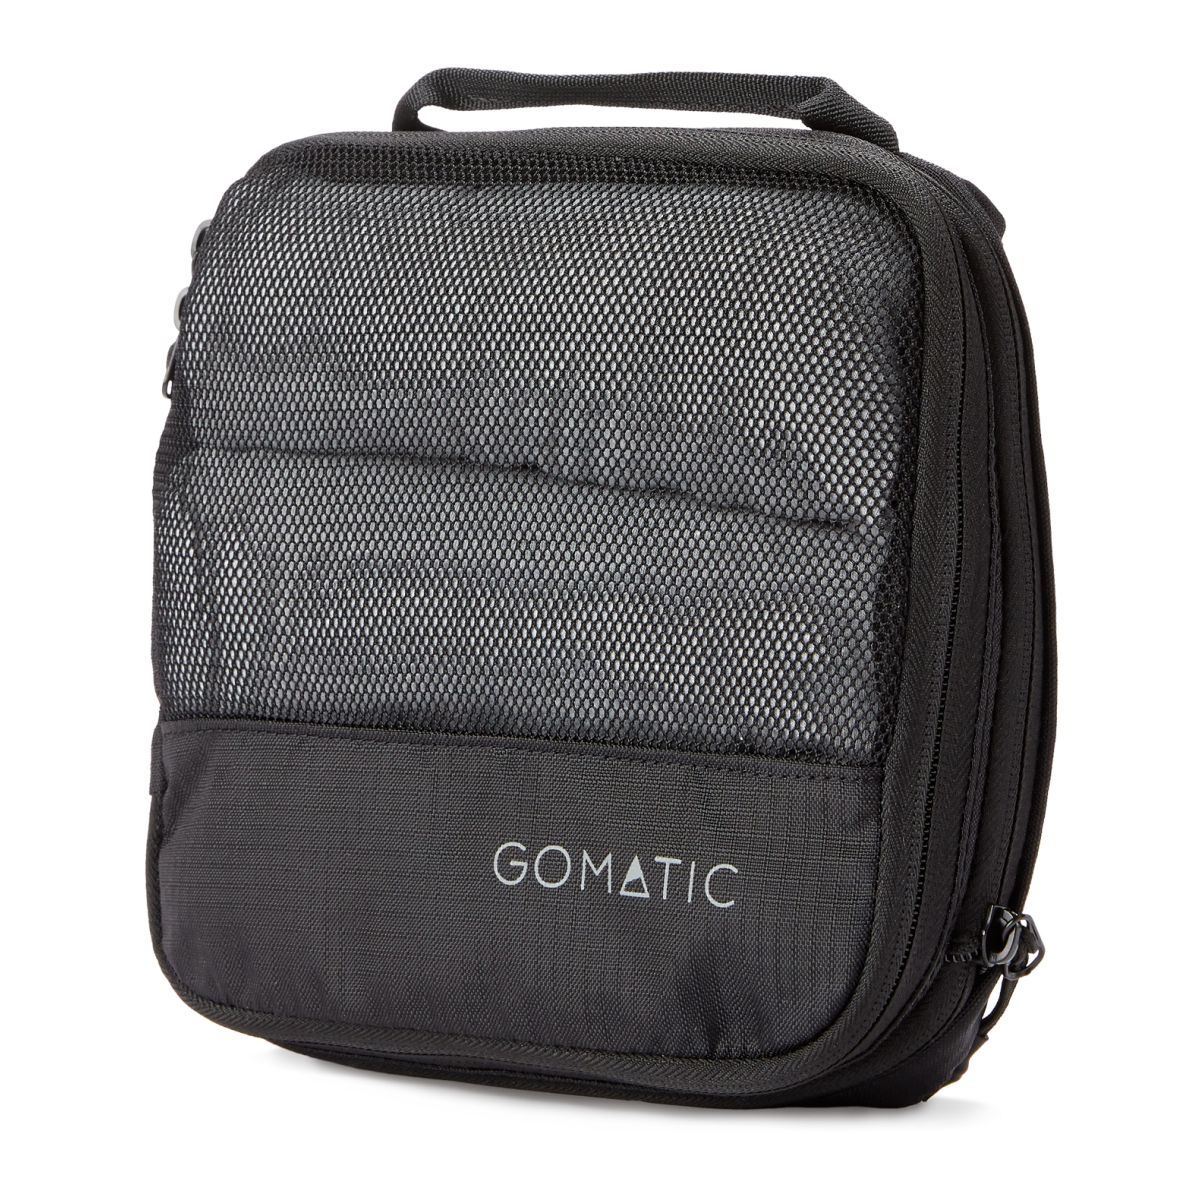 Gomatic Packing Cube V2 Small